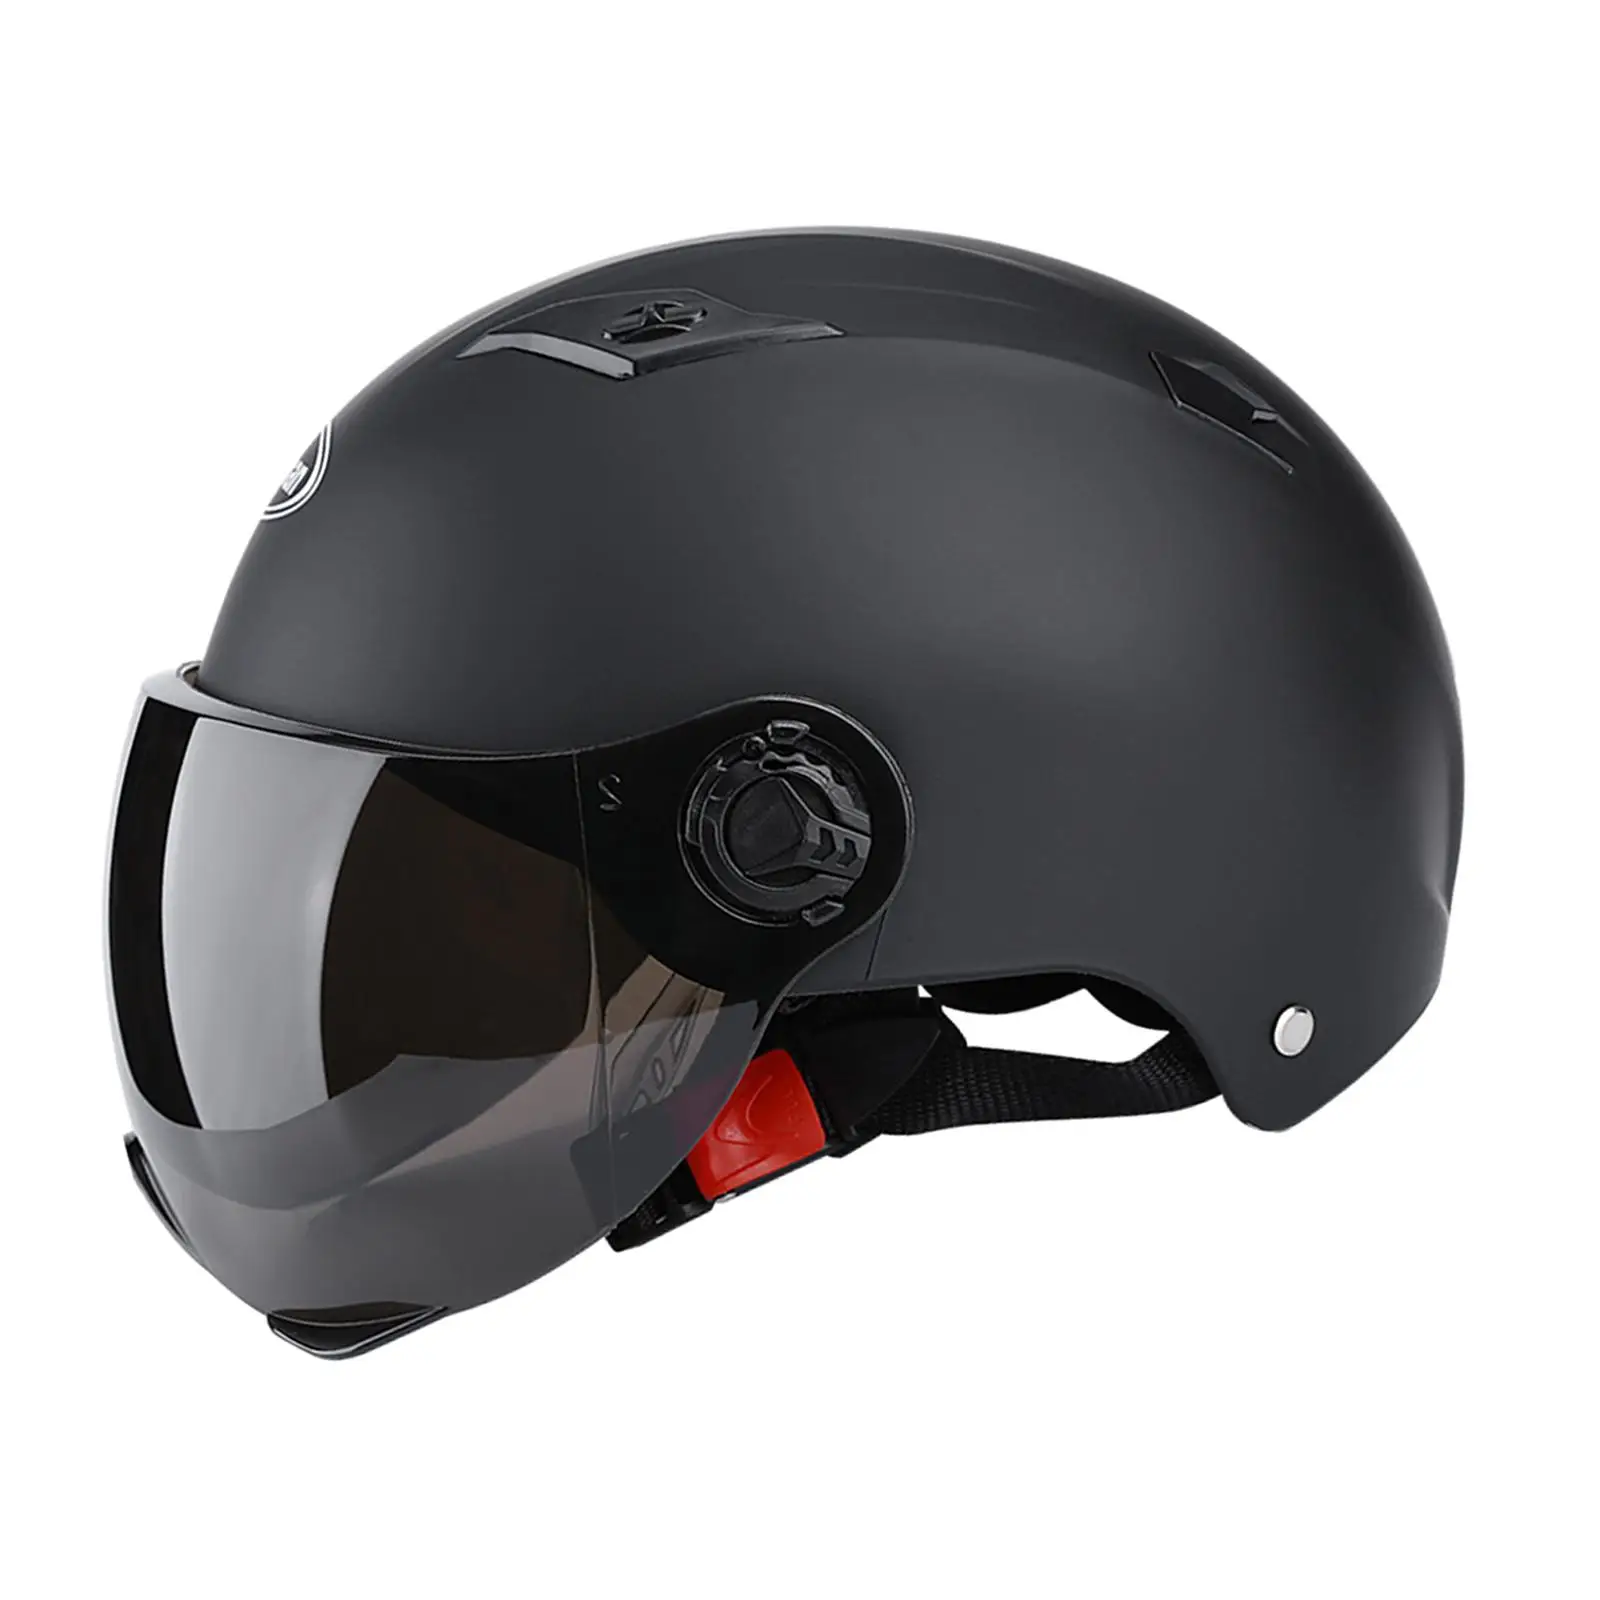 Motorcycle Street Face Retractable for Unisex Adult